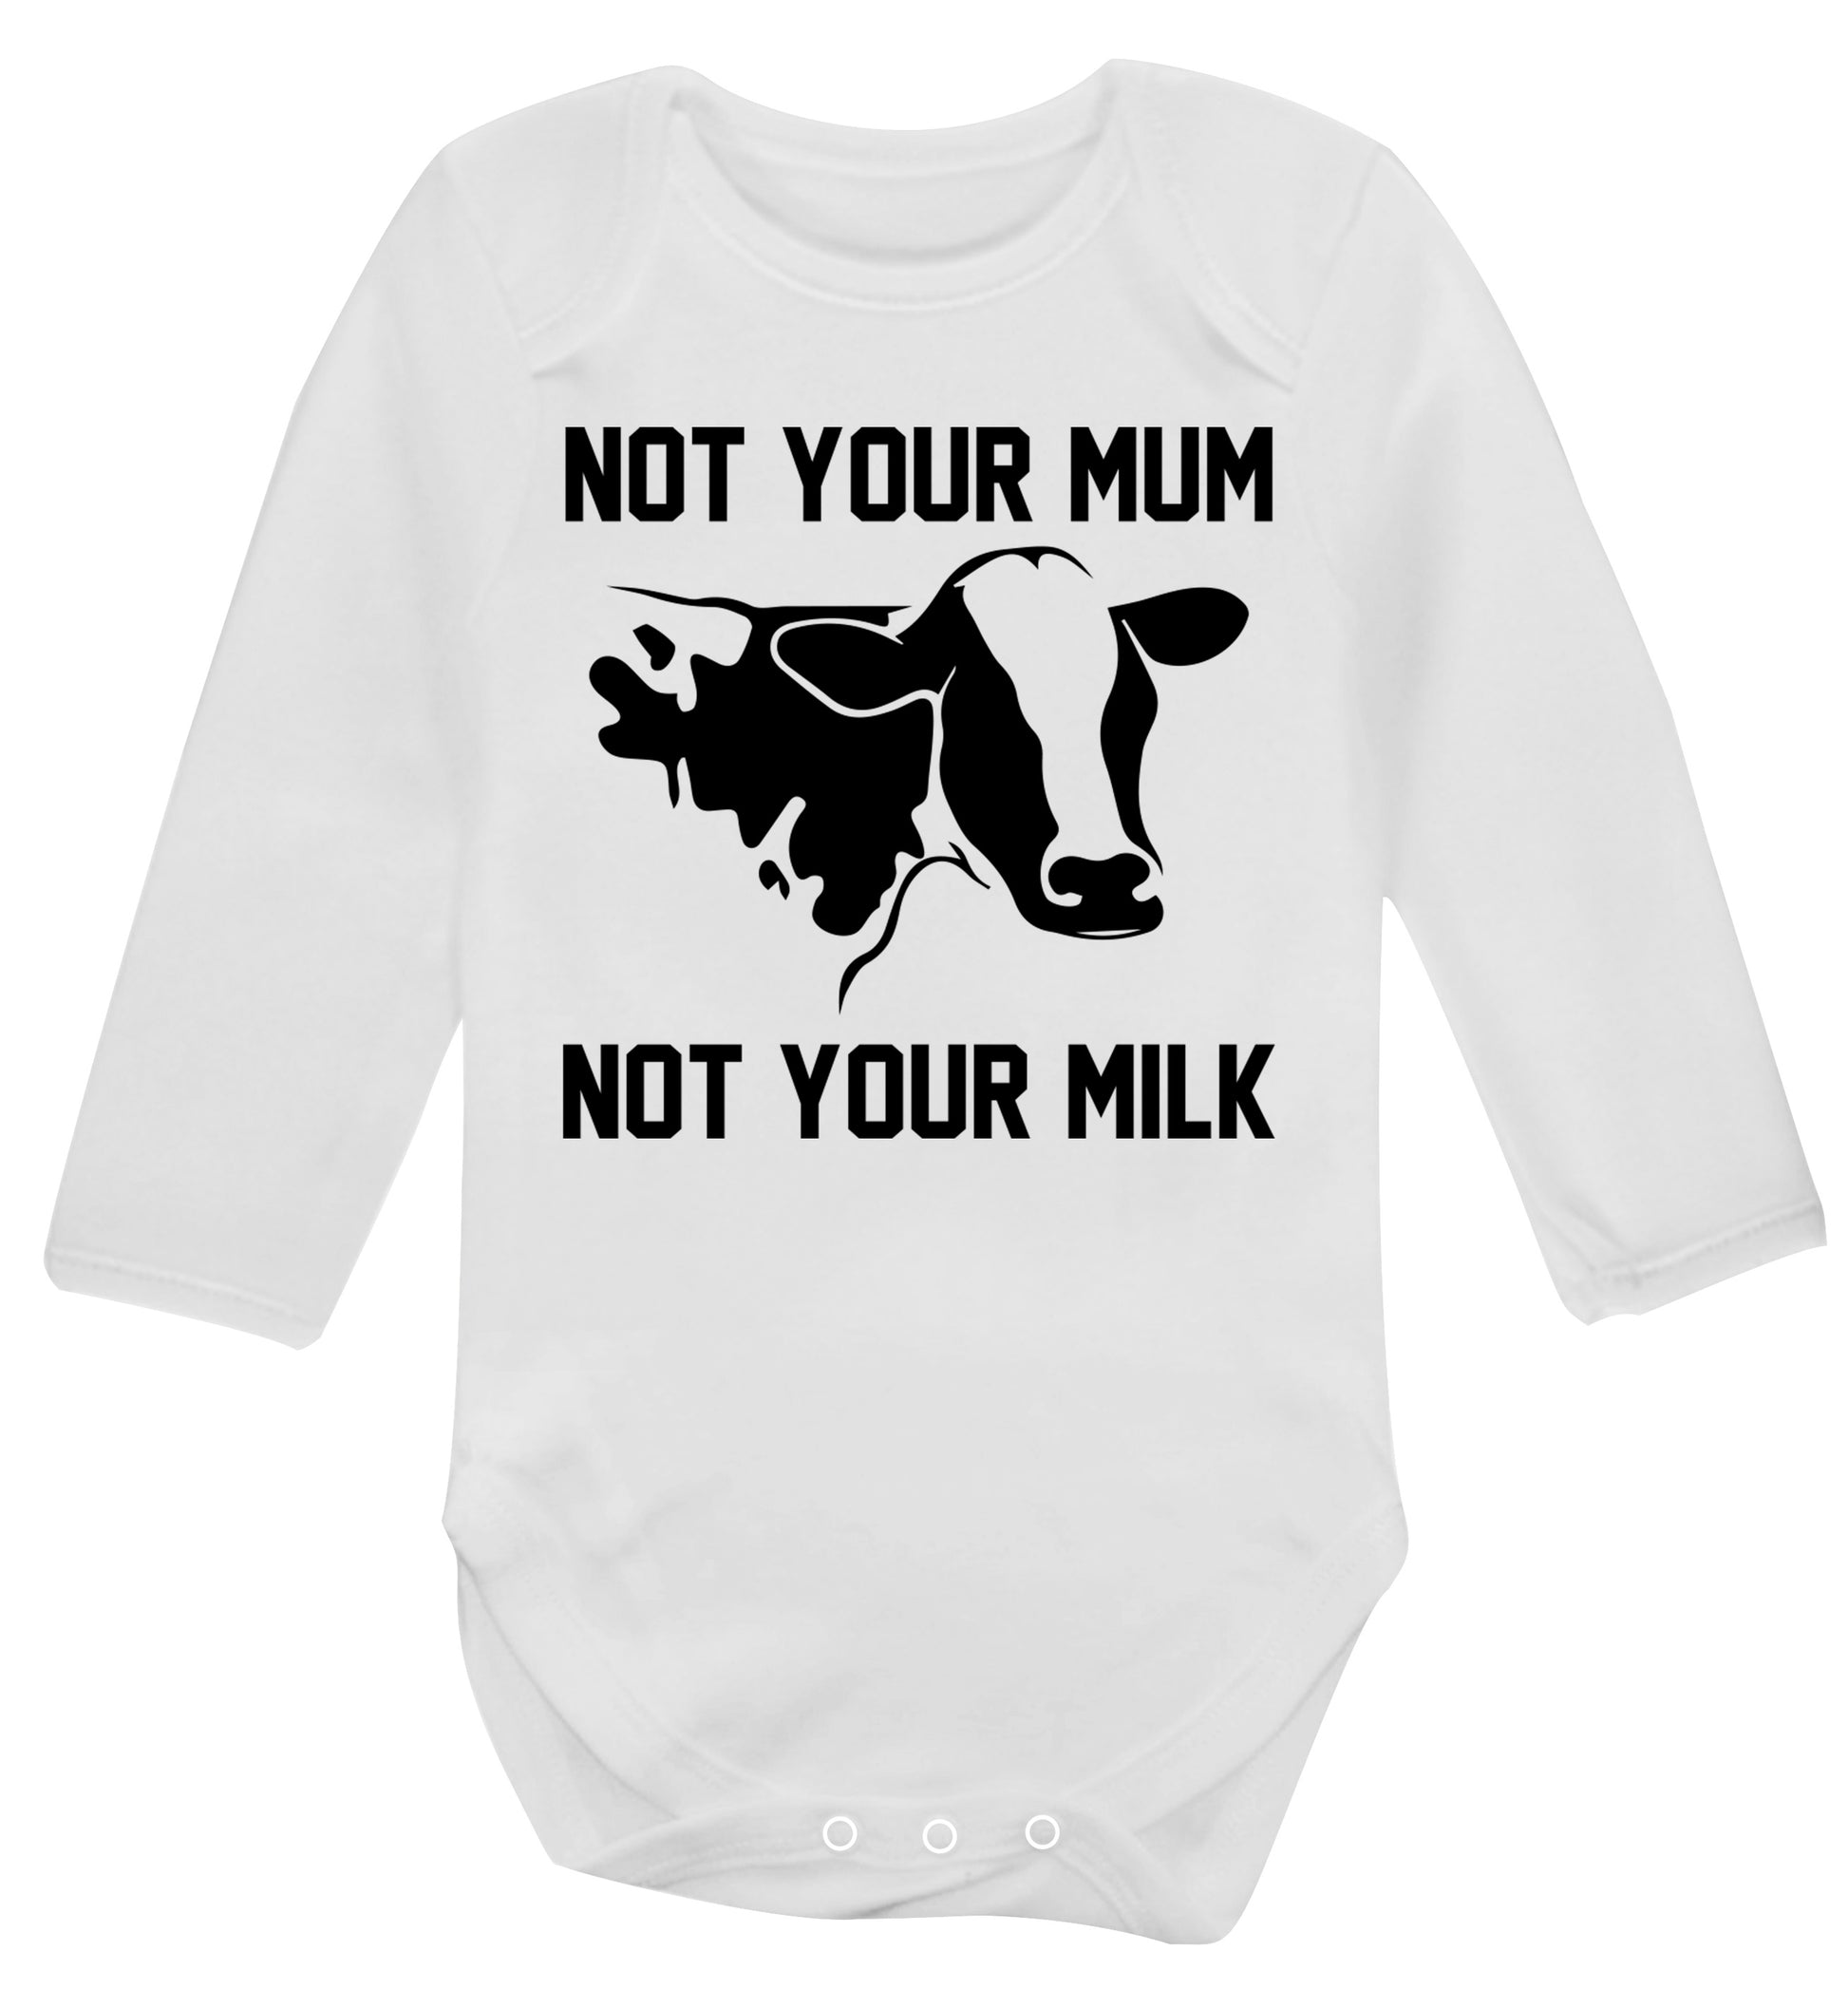 Not your mum not your milk Baby Vest long sleeved white 6-12 months